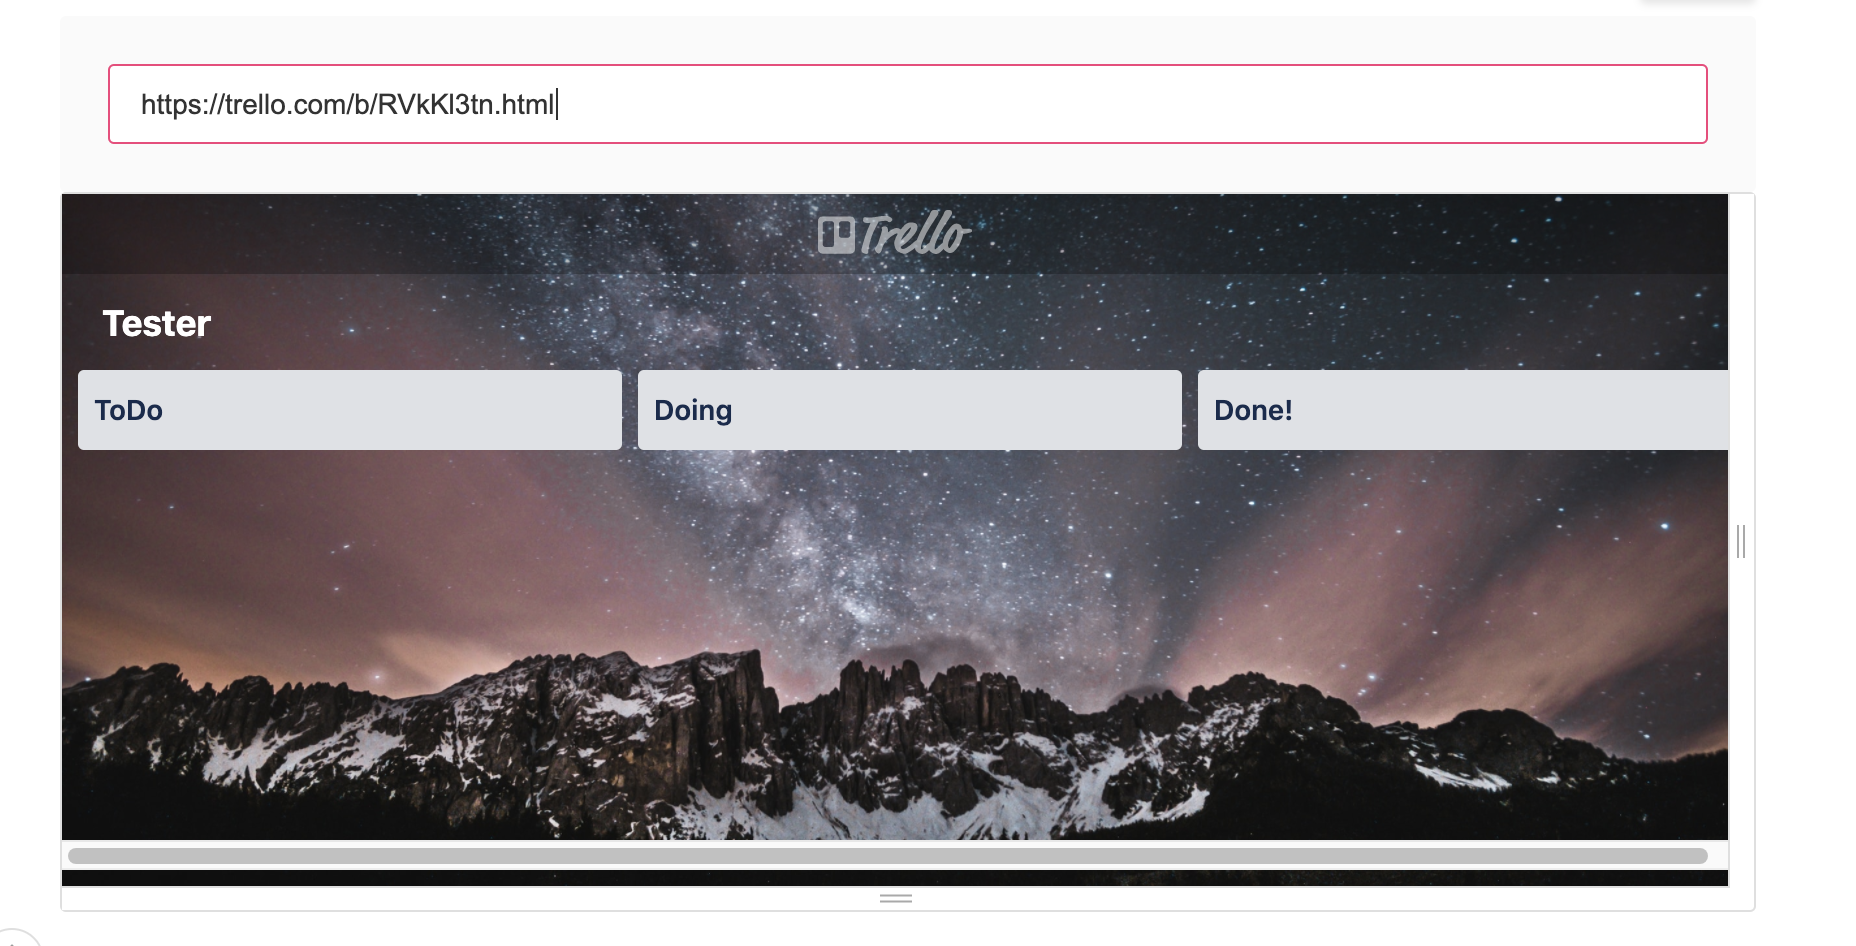 Embedded Trello board in iFrame